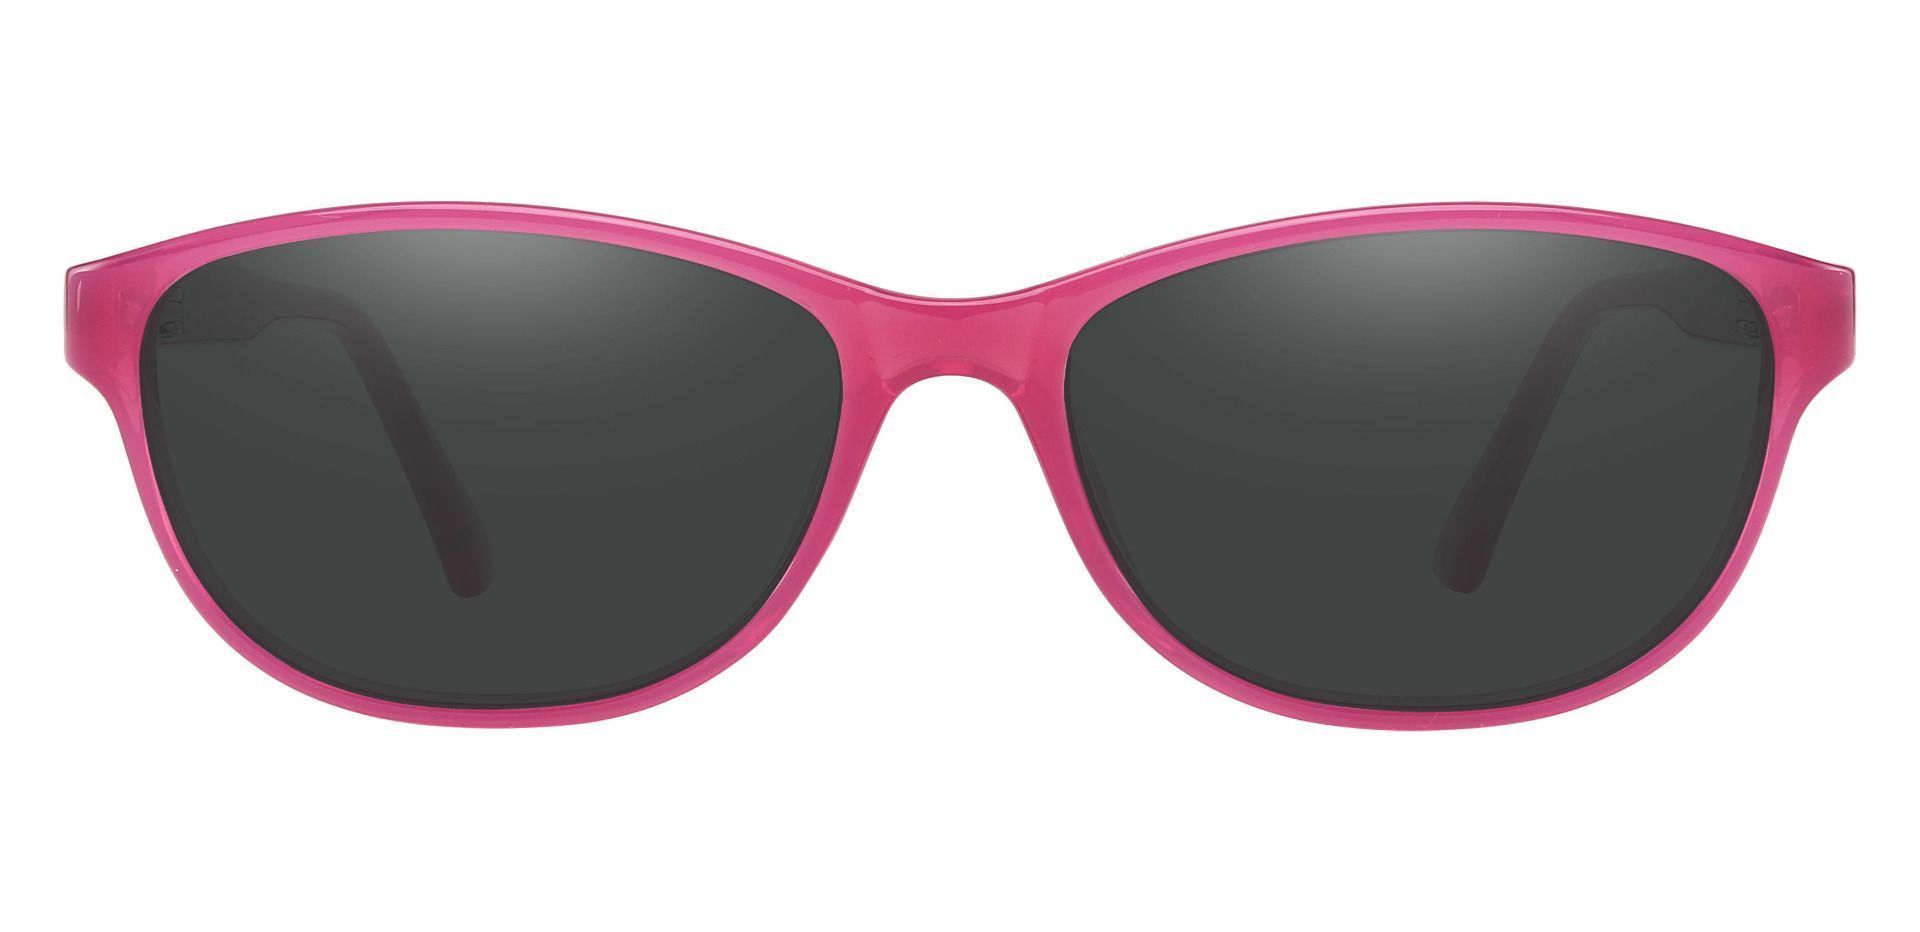 Patsy Oval Non-Rx Sunglasses - Pink Frame With Gray Lenses